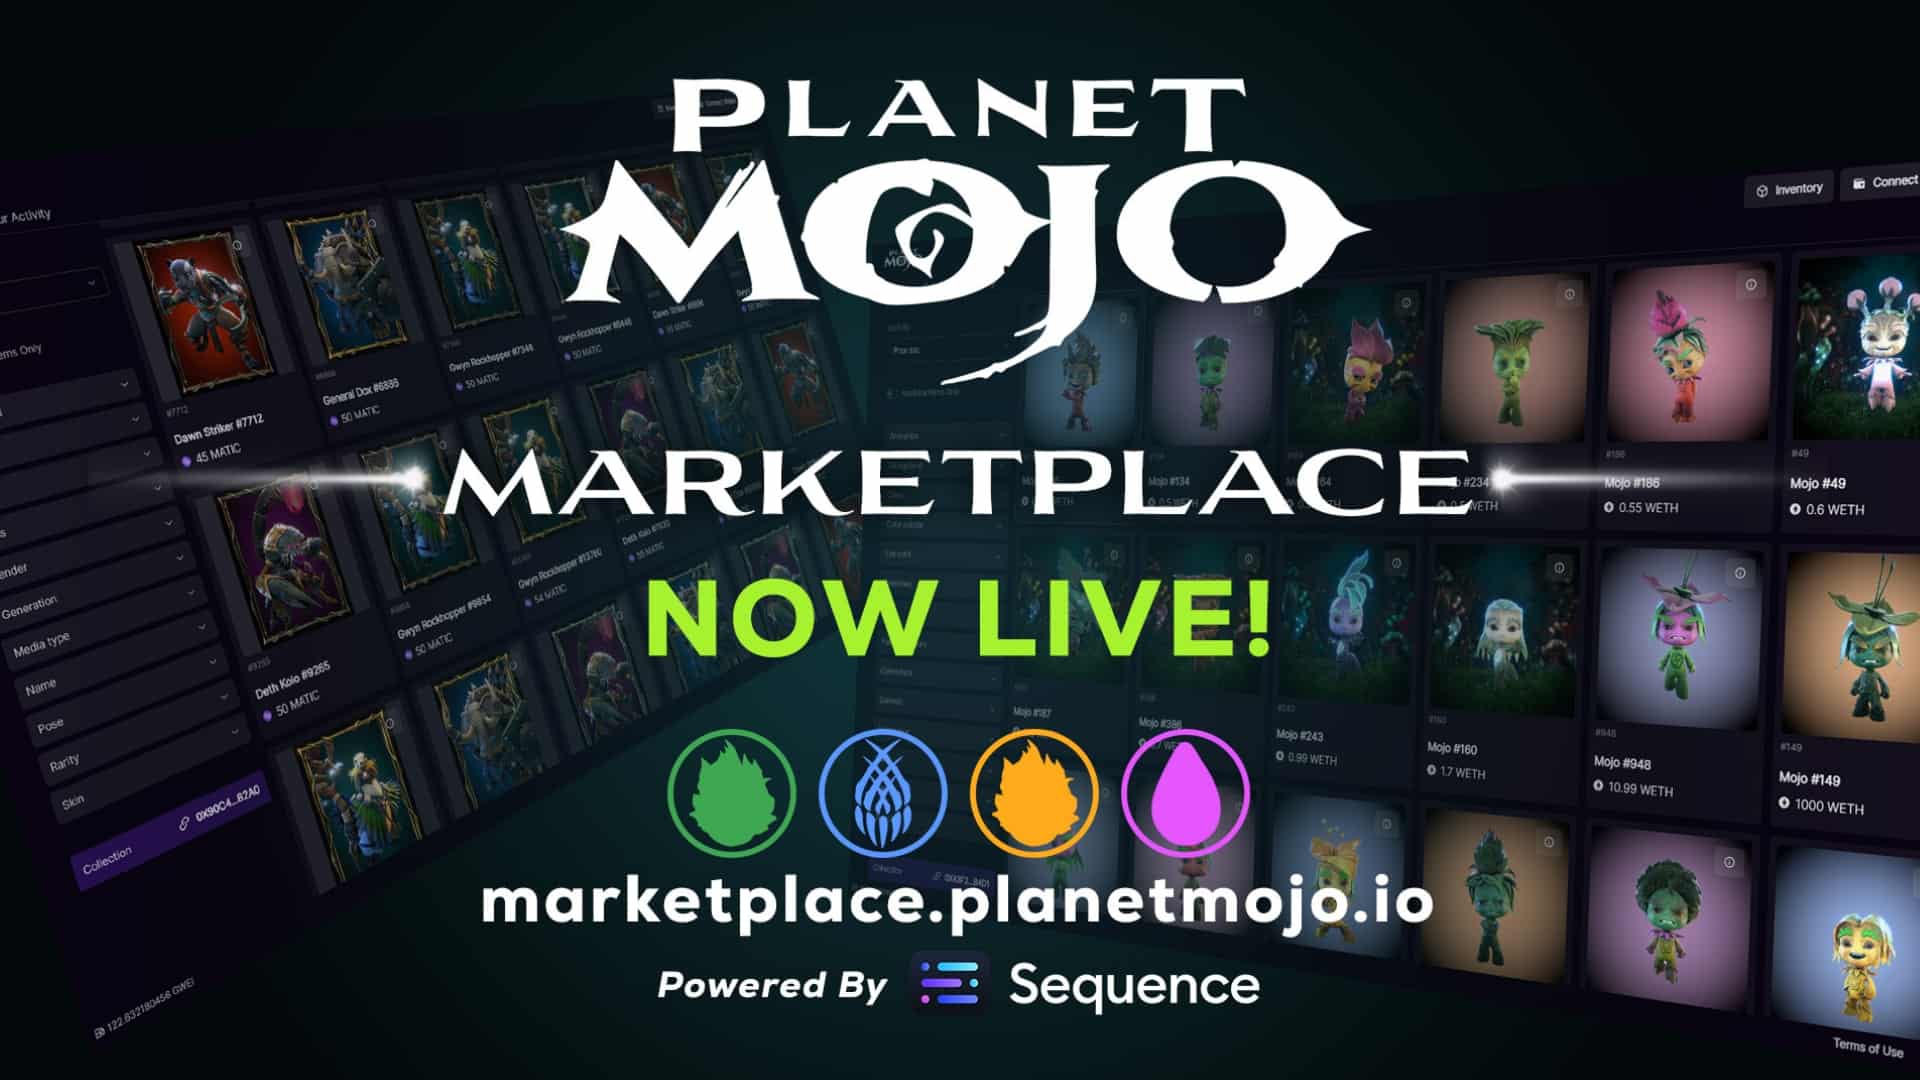 Mojo Melee Web3 game launches on  Prime Gaming